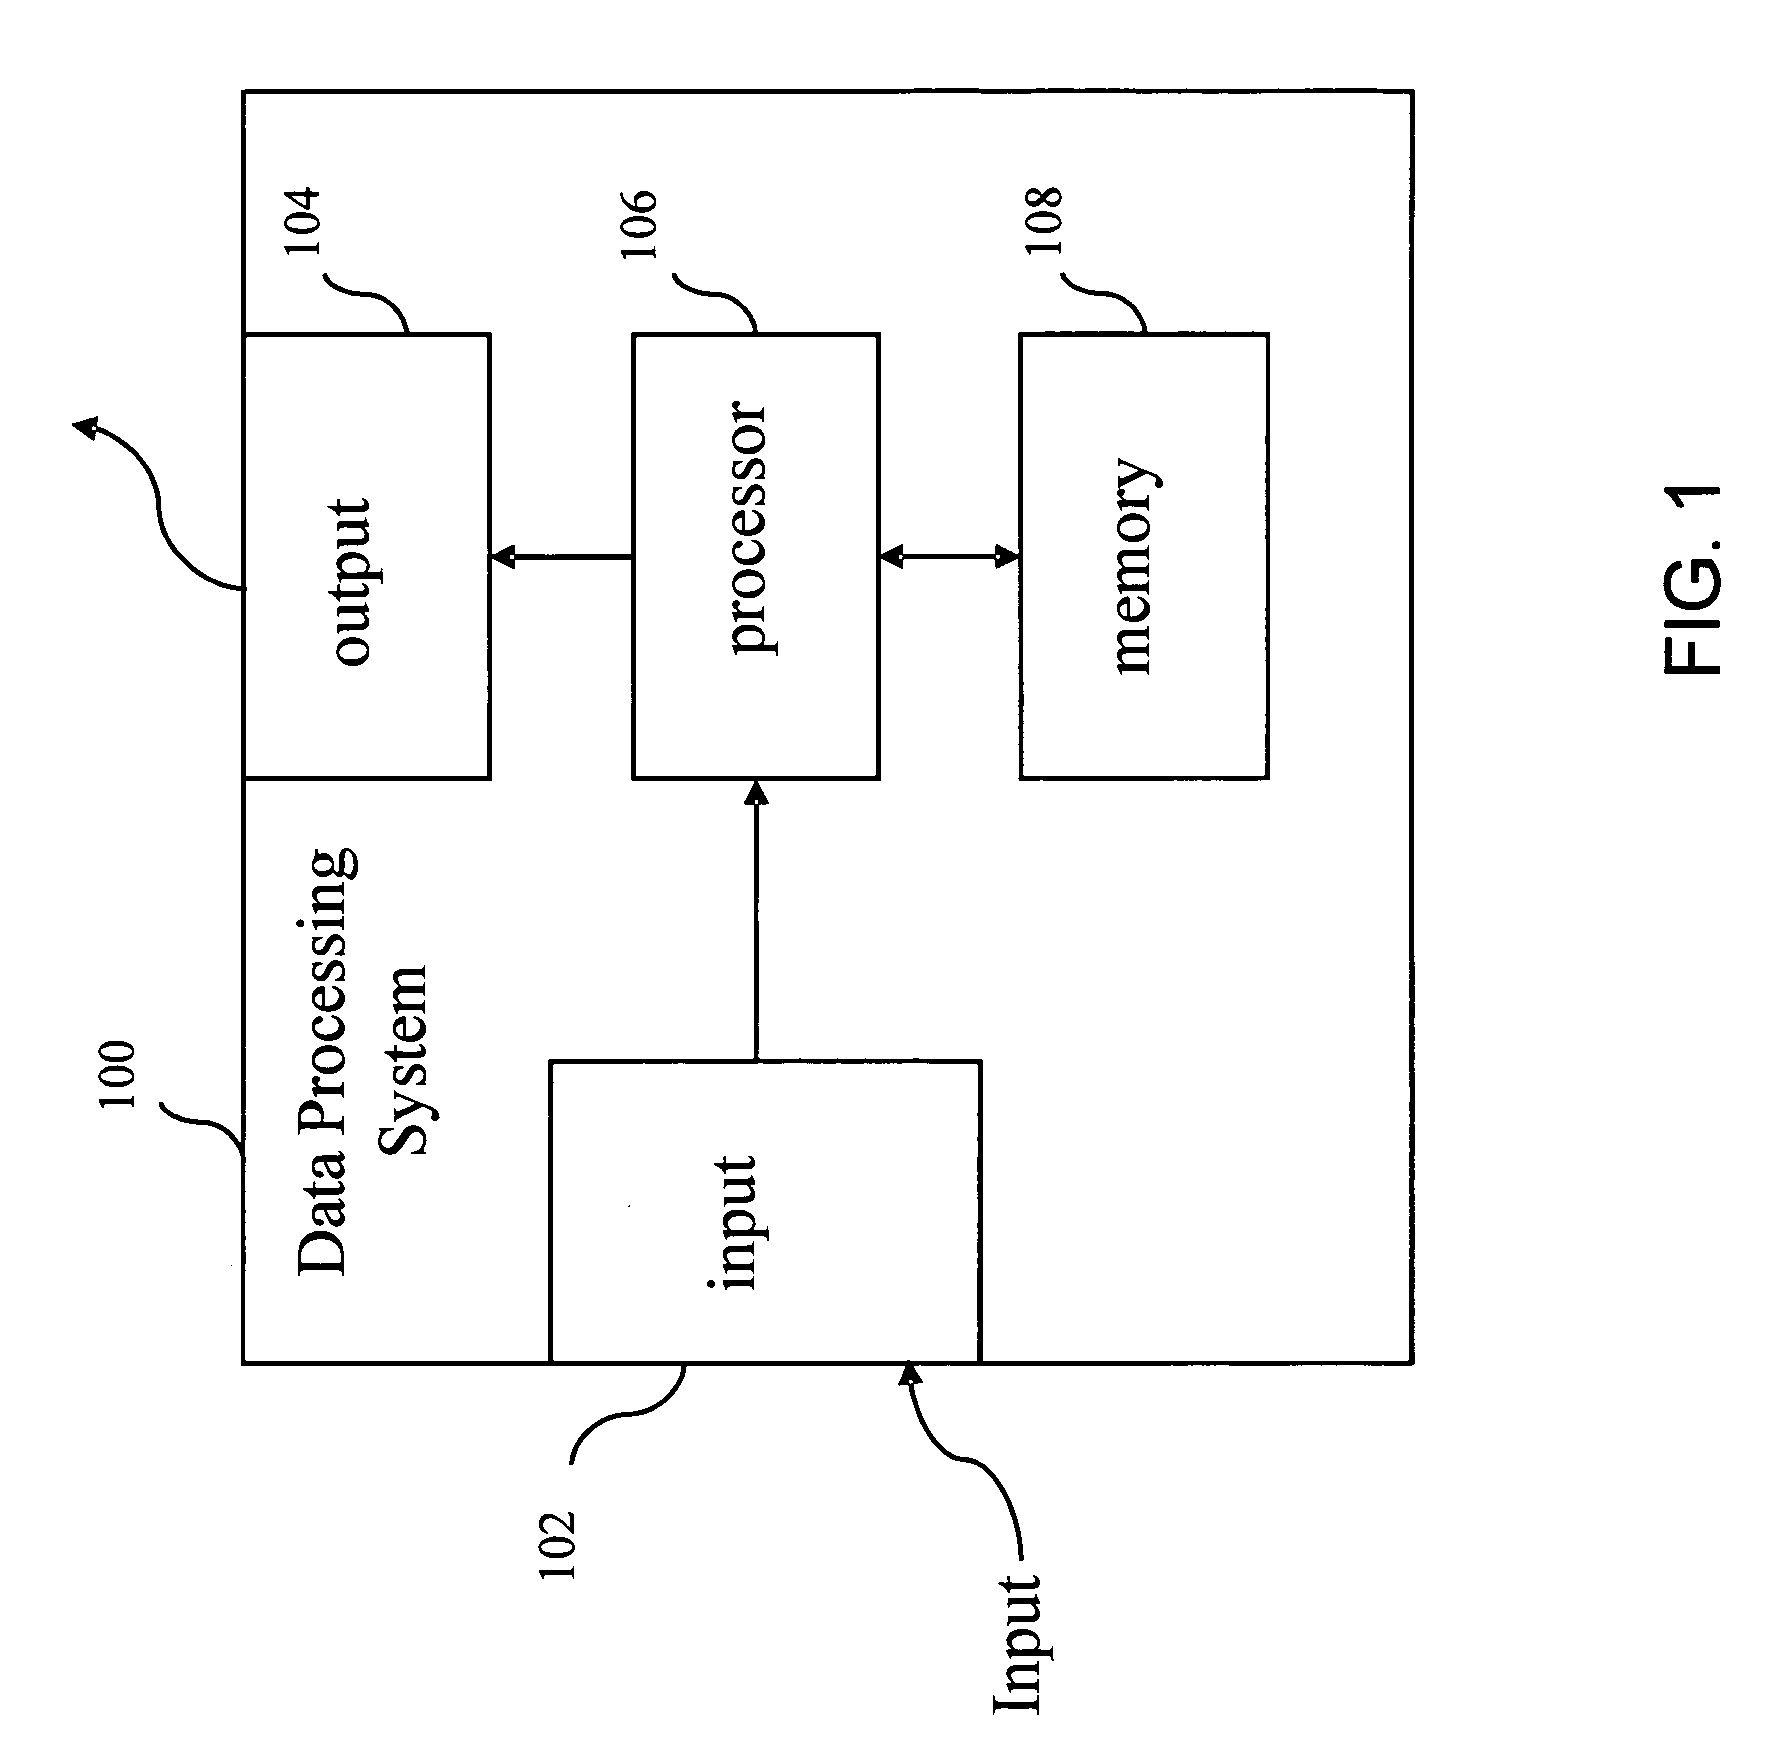 System, Method and computer program product for integrated analysis and visualization of genomic data